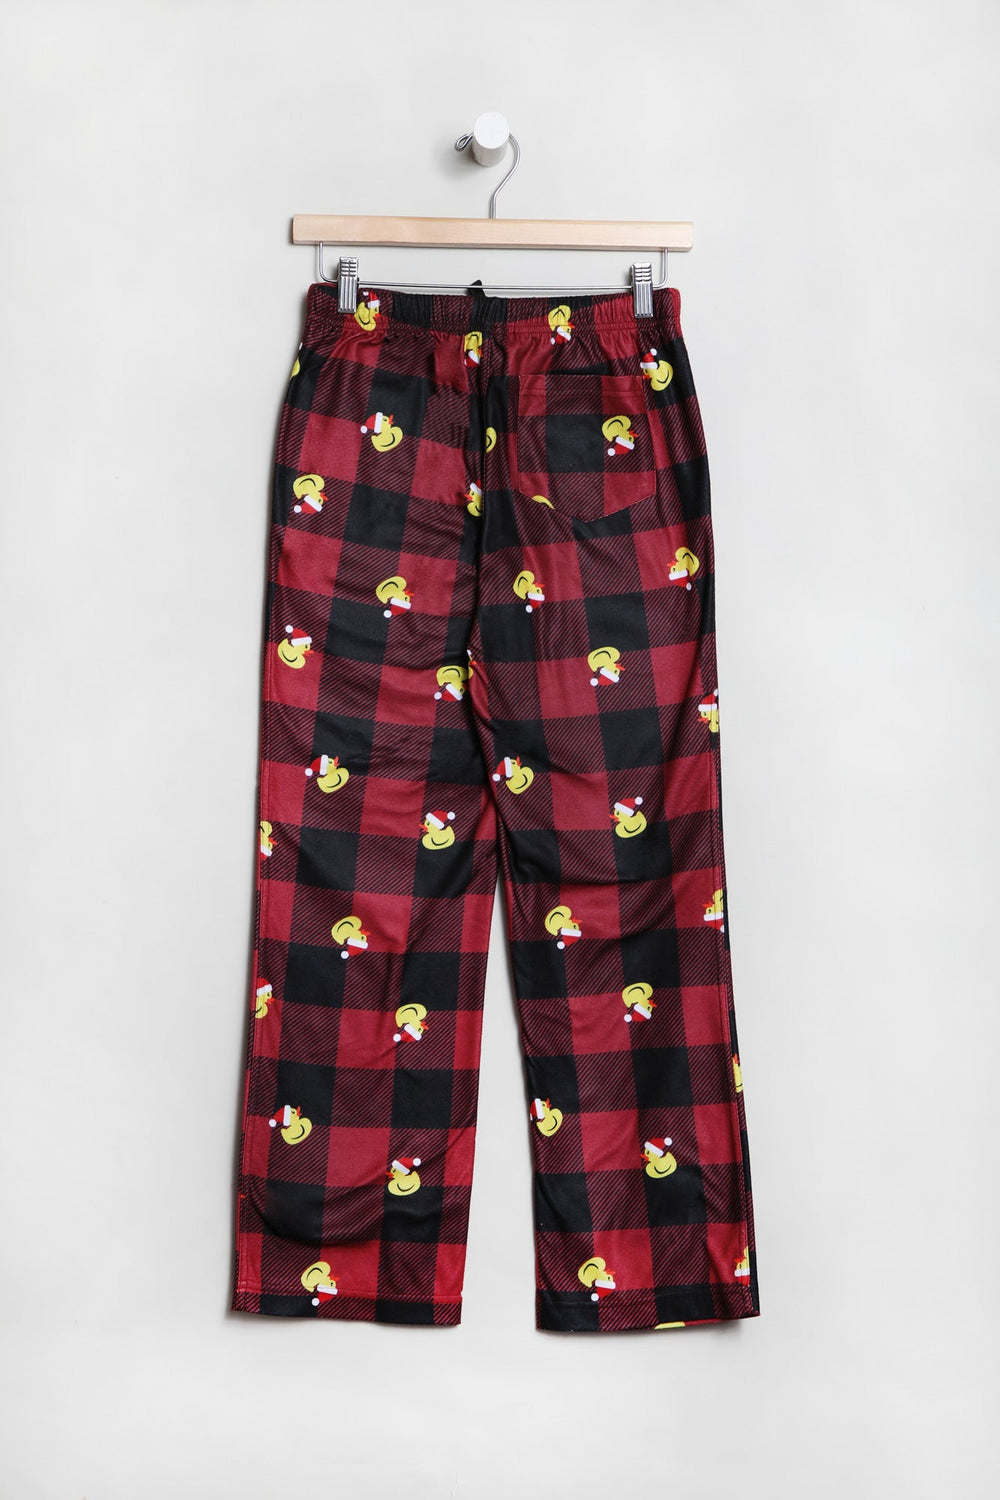 West49 Youth Holiday Duckies Pajama Bottoms Burgundy